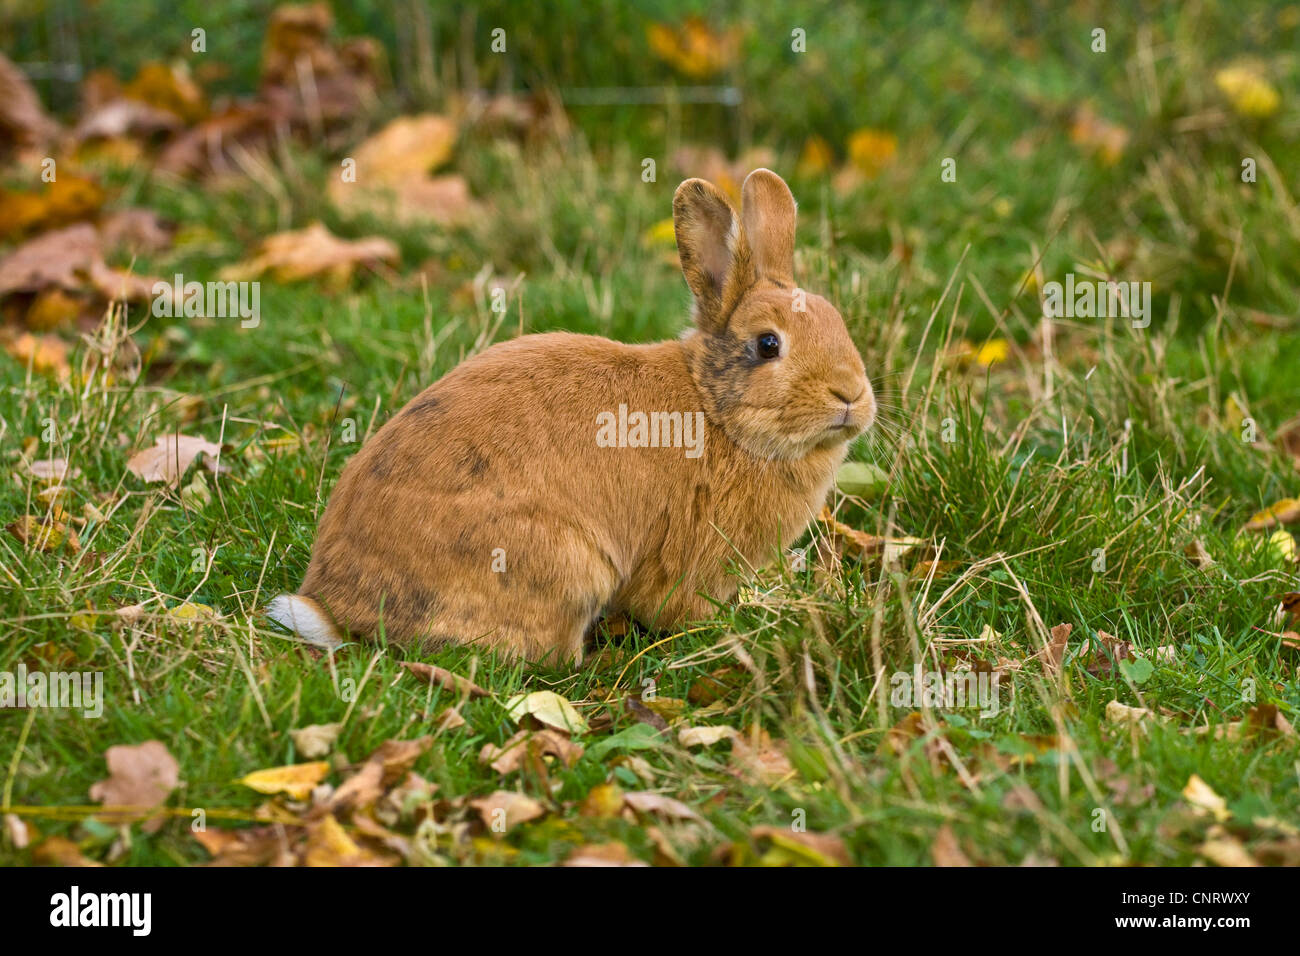 Lapin nain (Oryctolagus cuniculus f. domestica), Red Dwarf Rabbit sitting in meadow Banque D'Images